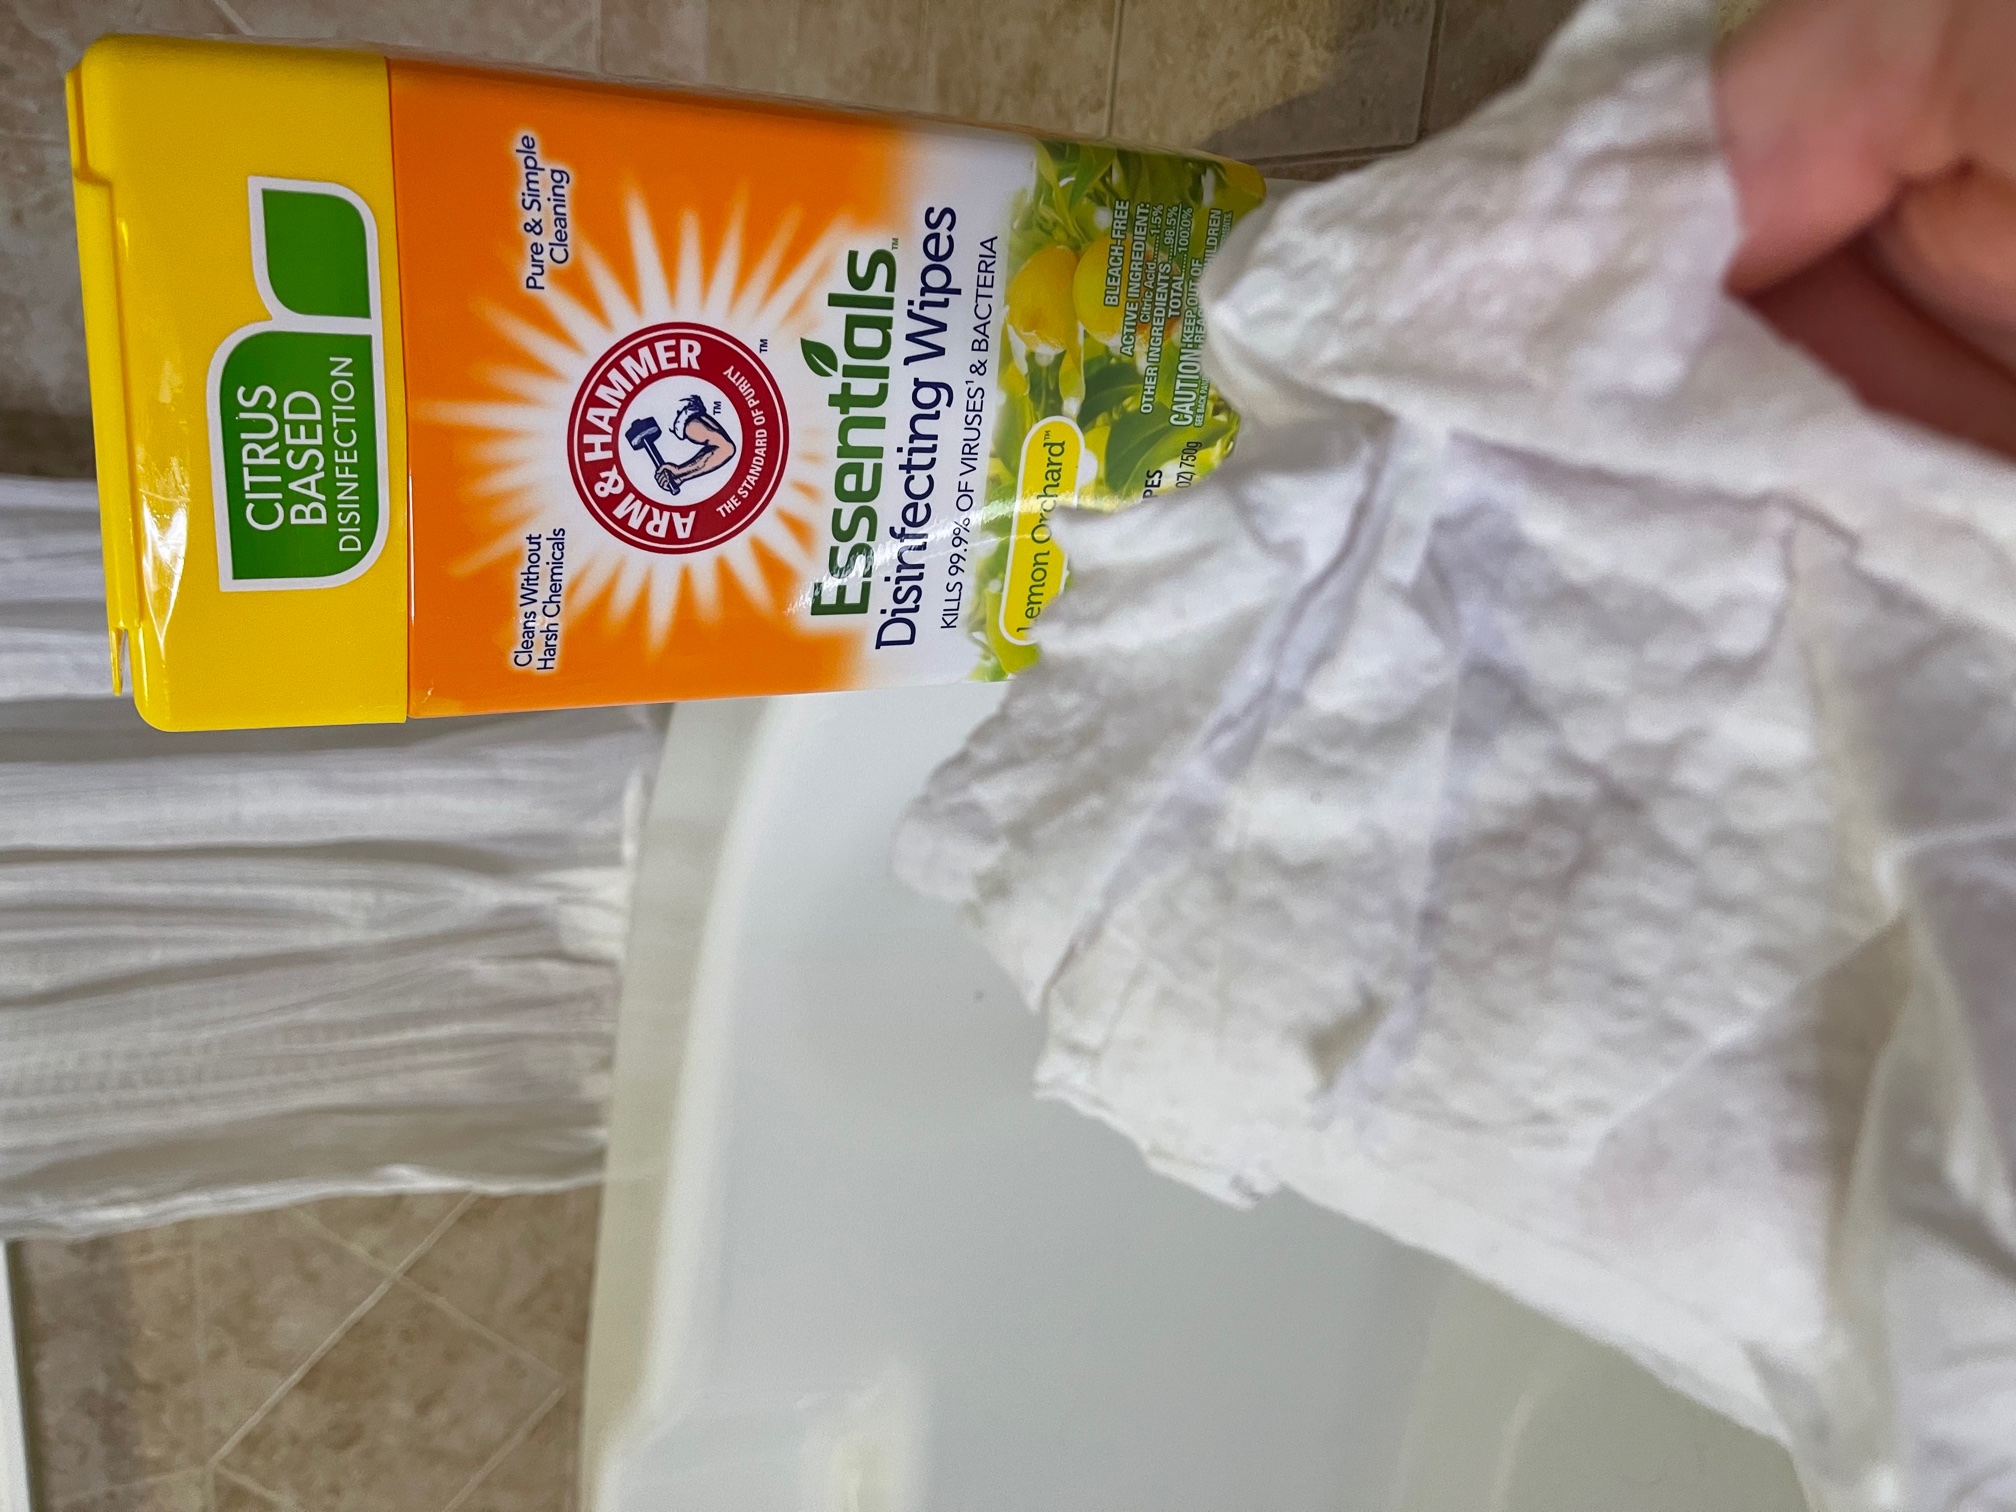 Arm and Hammer wipes